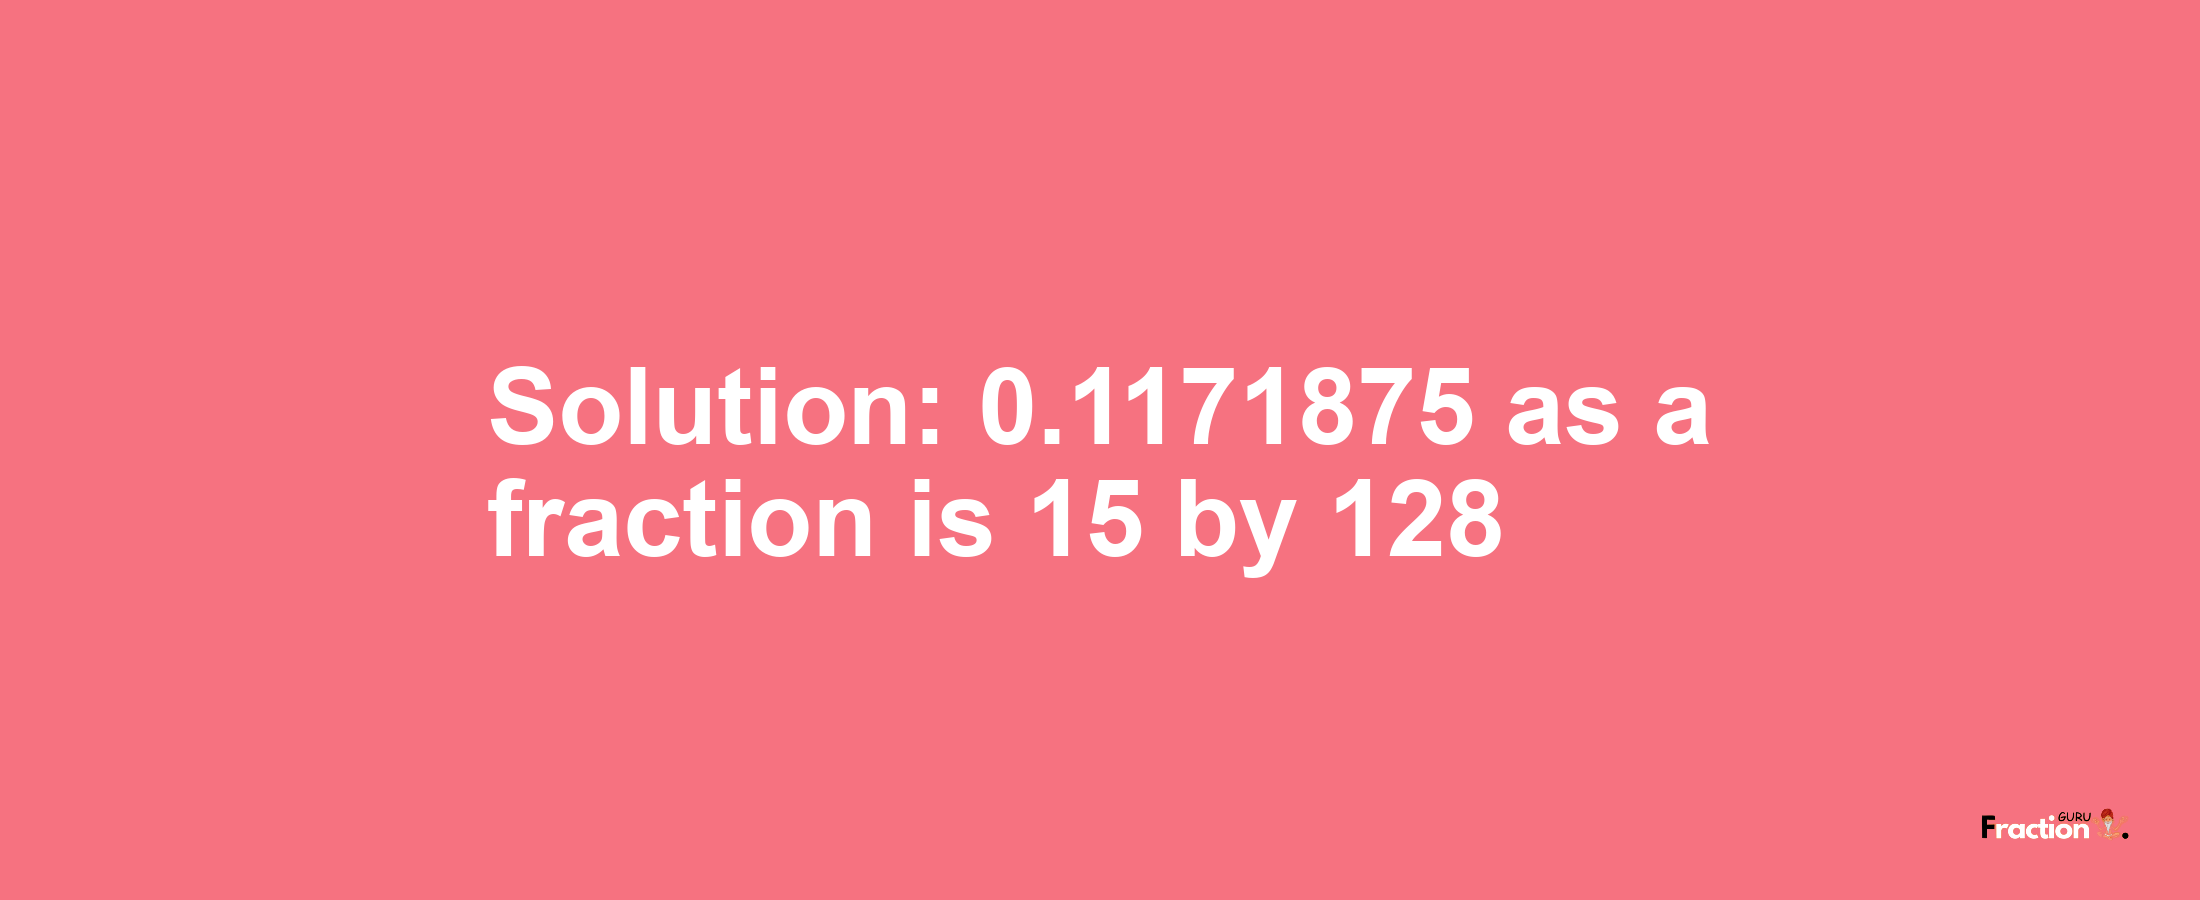 Solution:0.1171875 as a fraction is 15/128